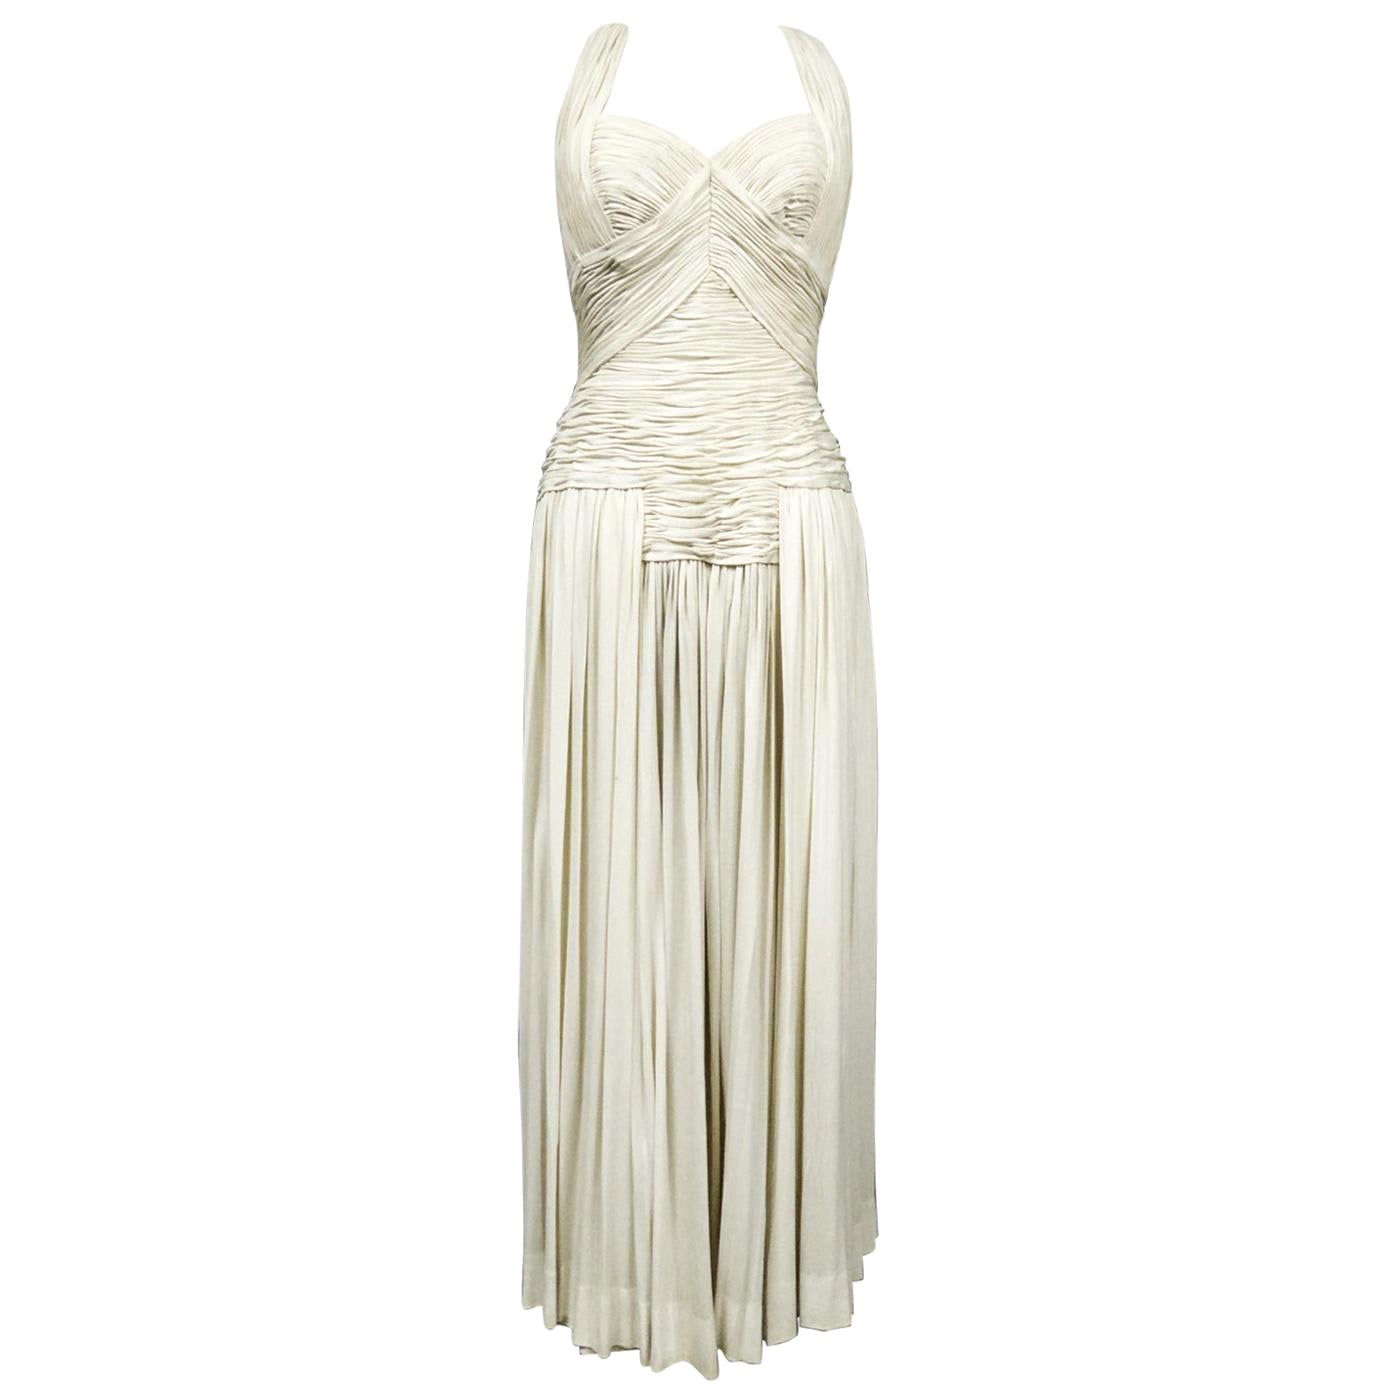 A Carven French Haute Couture Evening Dress in Pleated Jersey Silk Circa 1950